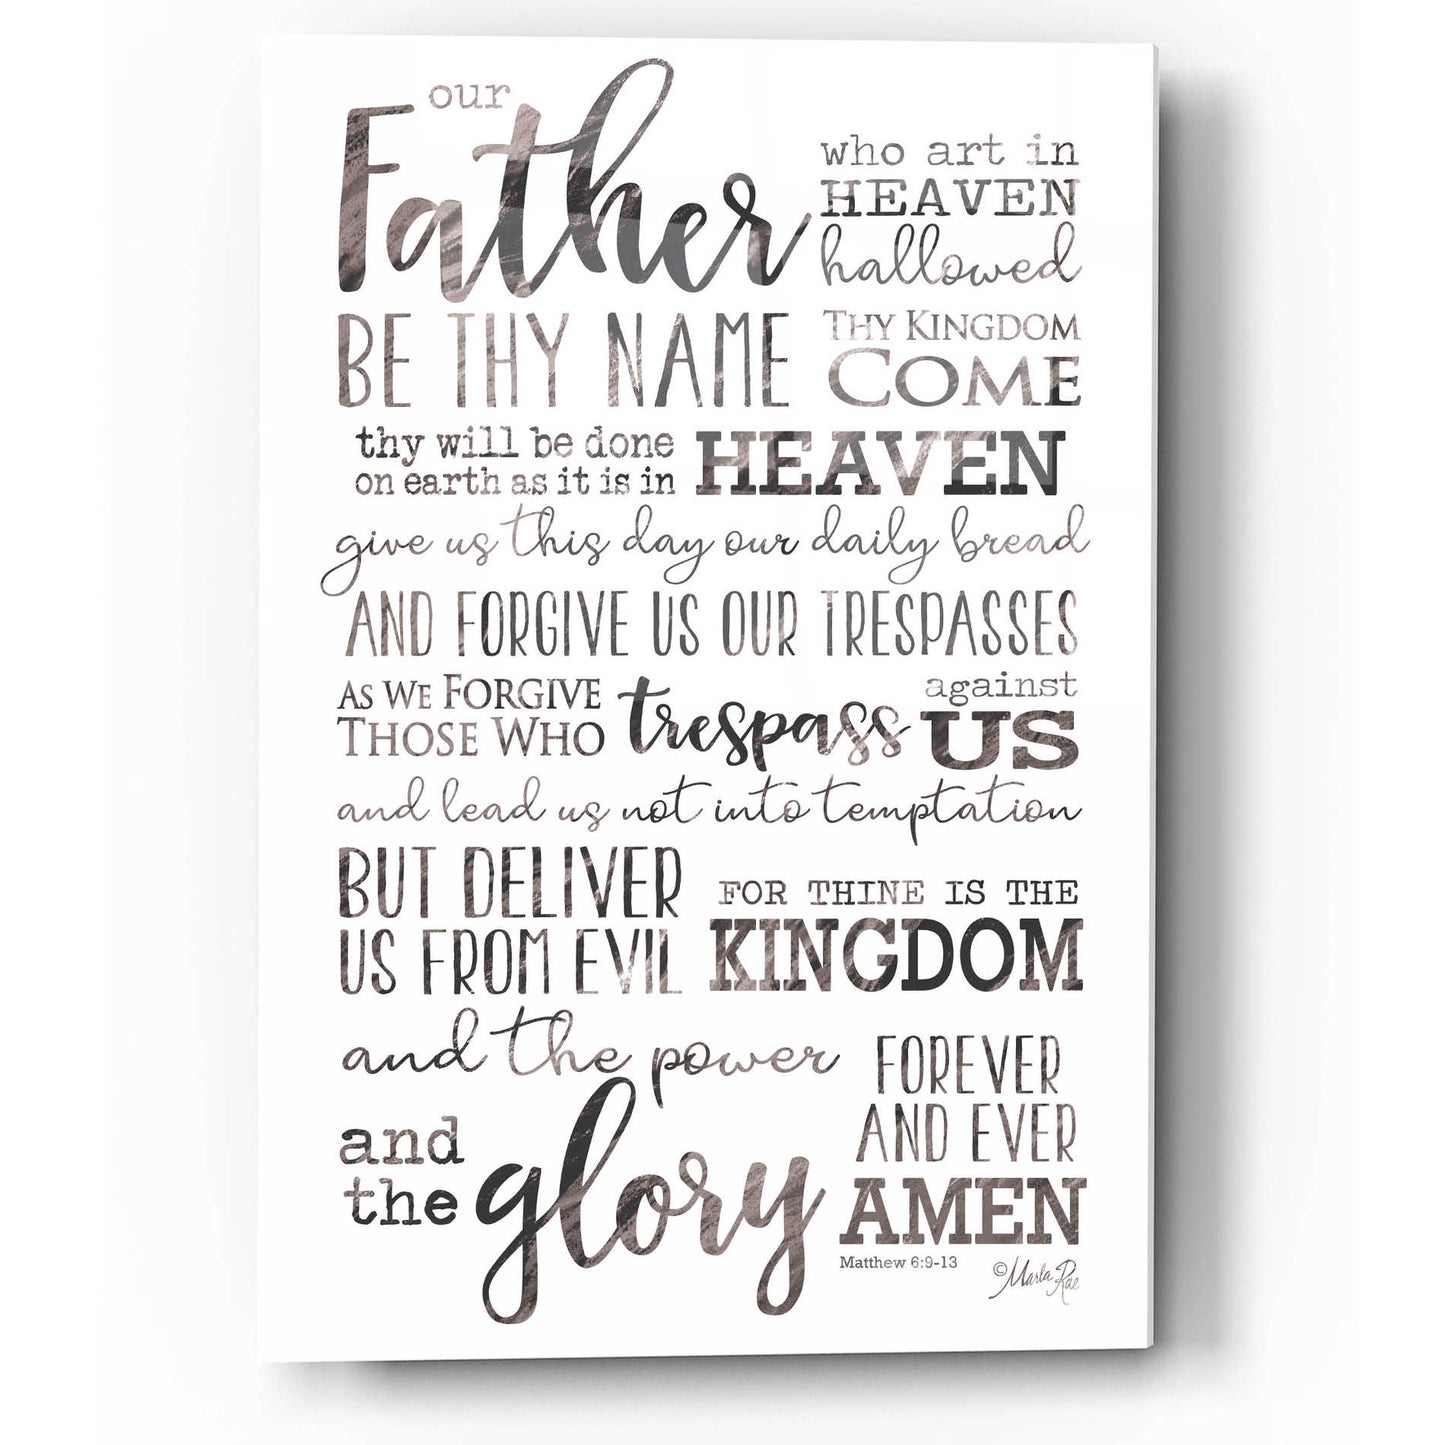 Epic Art 'Our Father' by Marla Rae, Acrylic Glass Wall Art,12x16